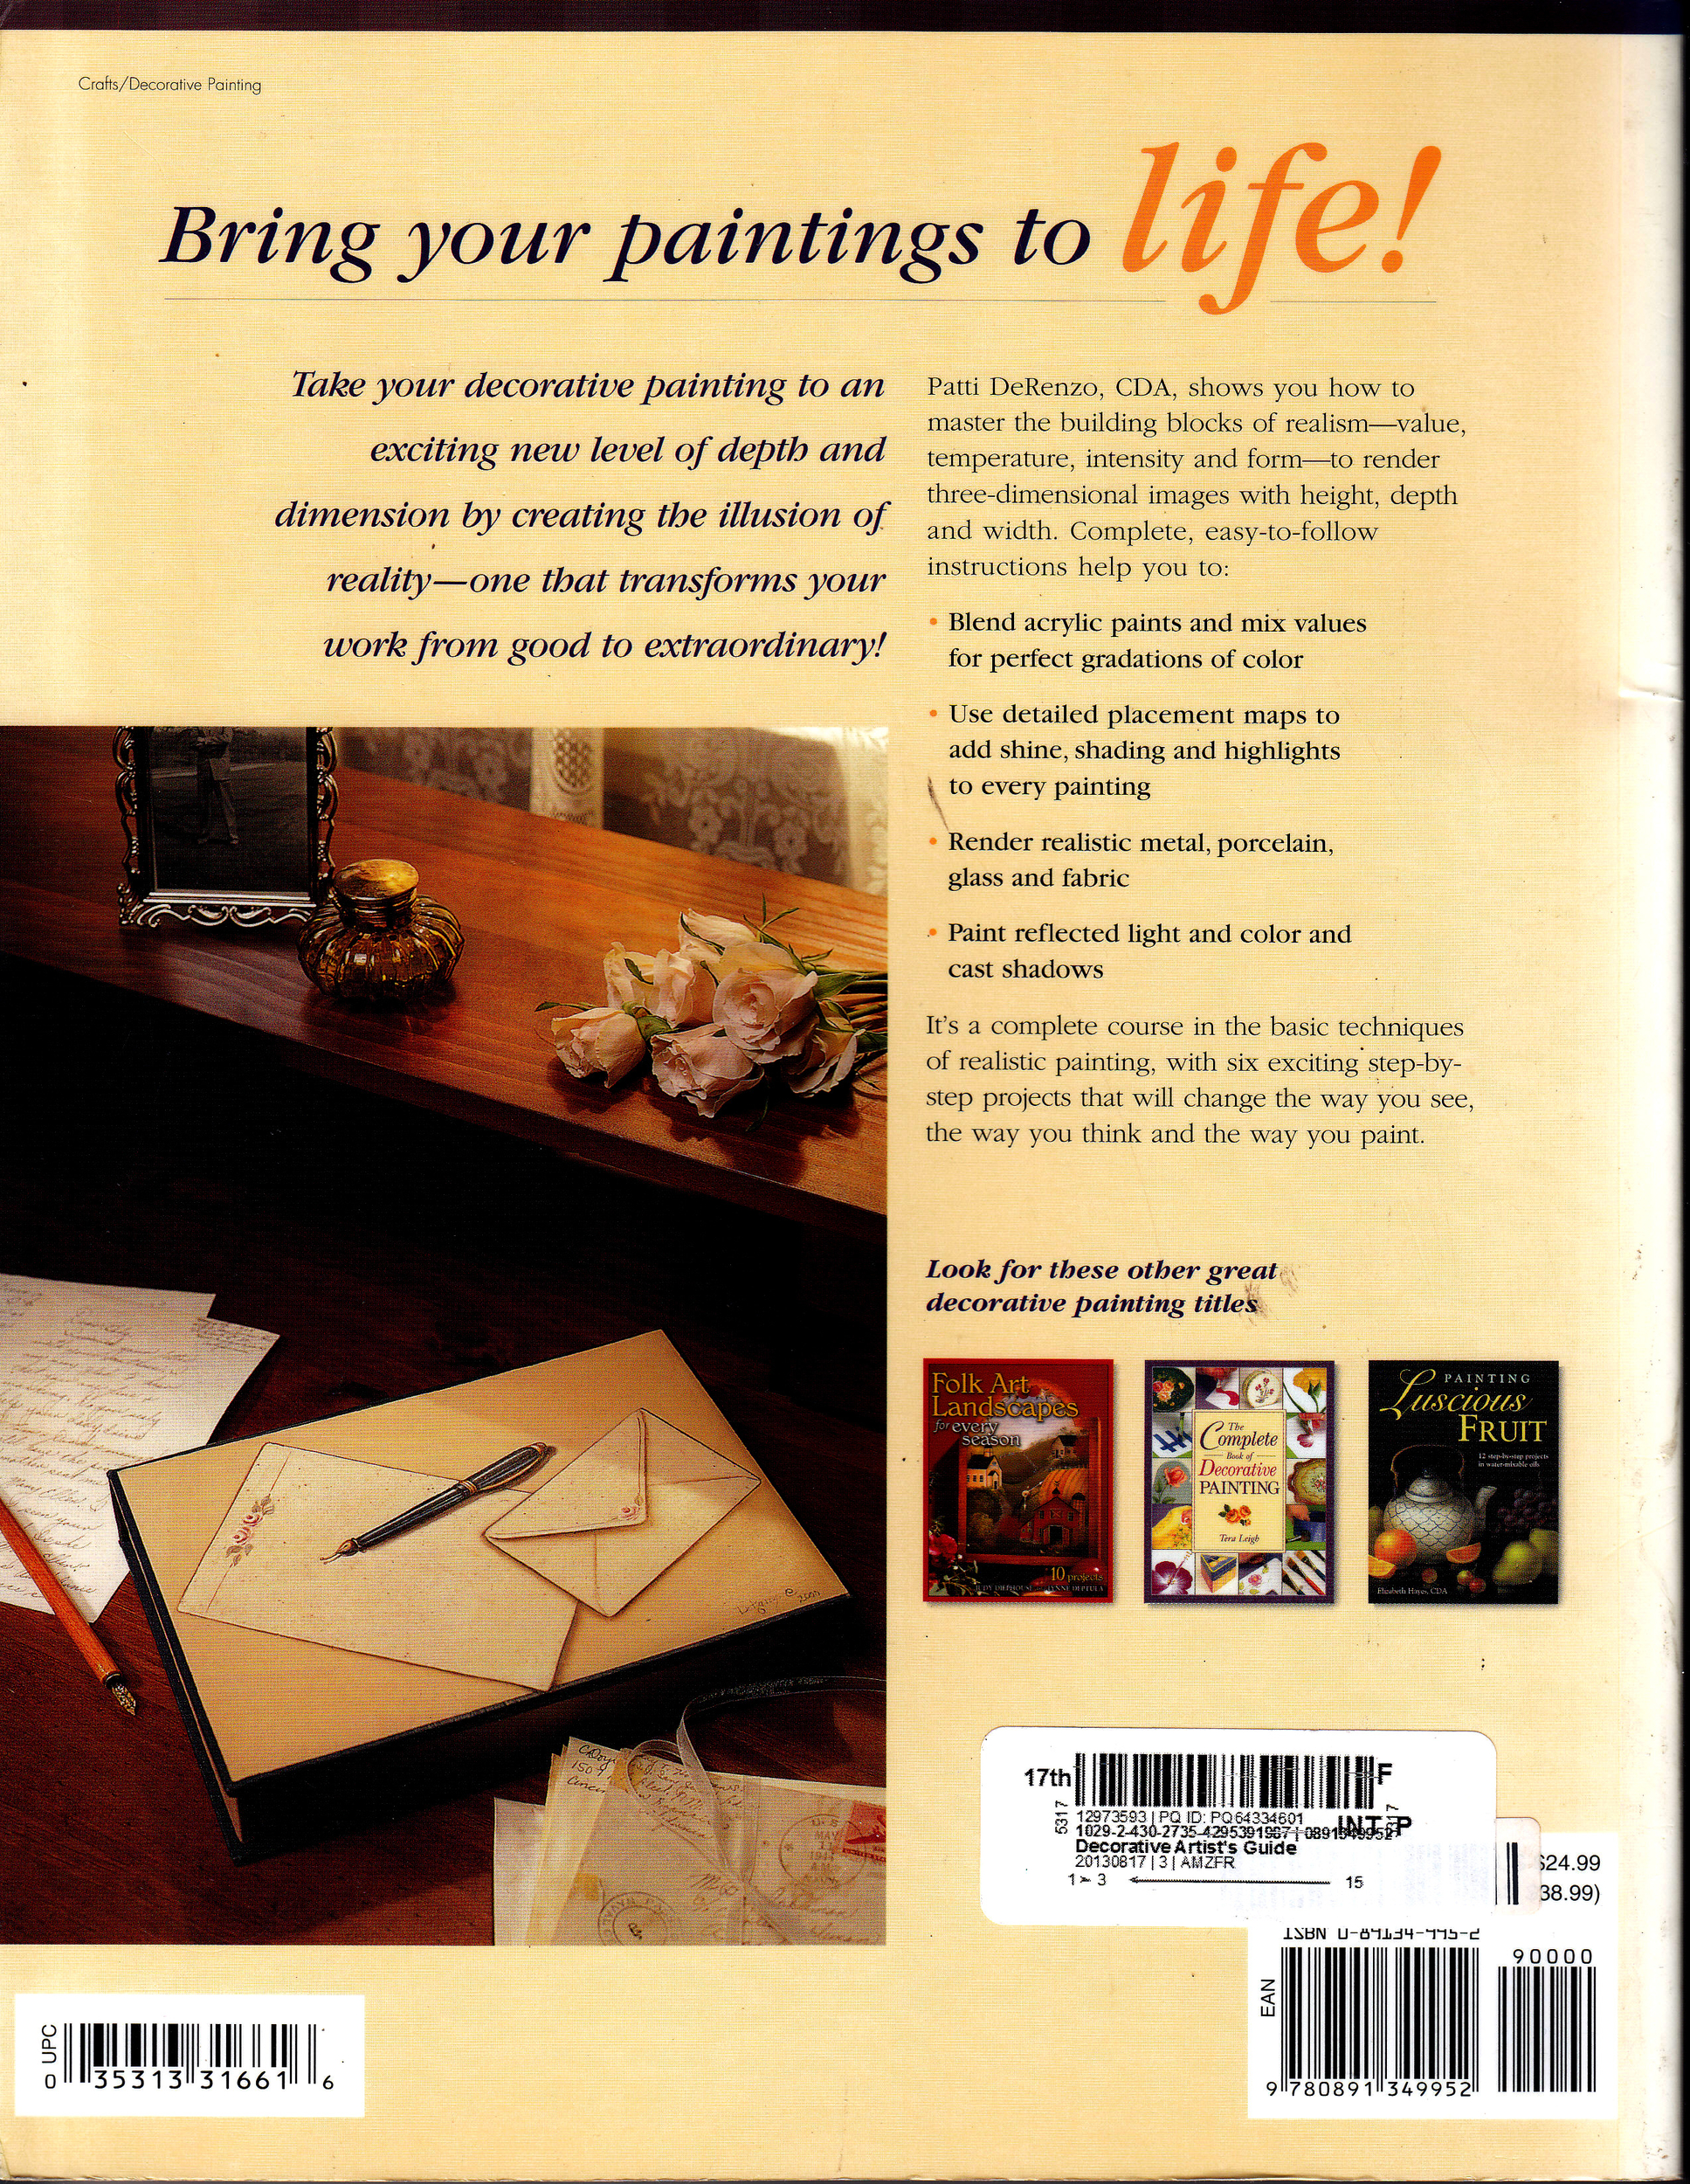 Decorative Artists guide to Realistic Painting_0001